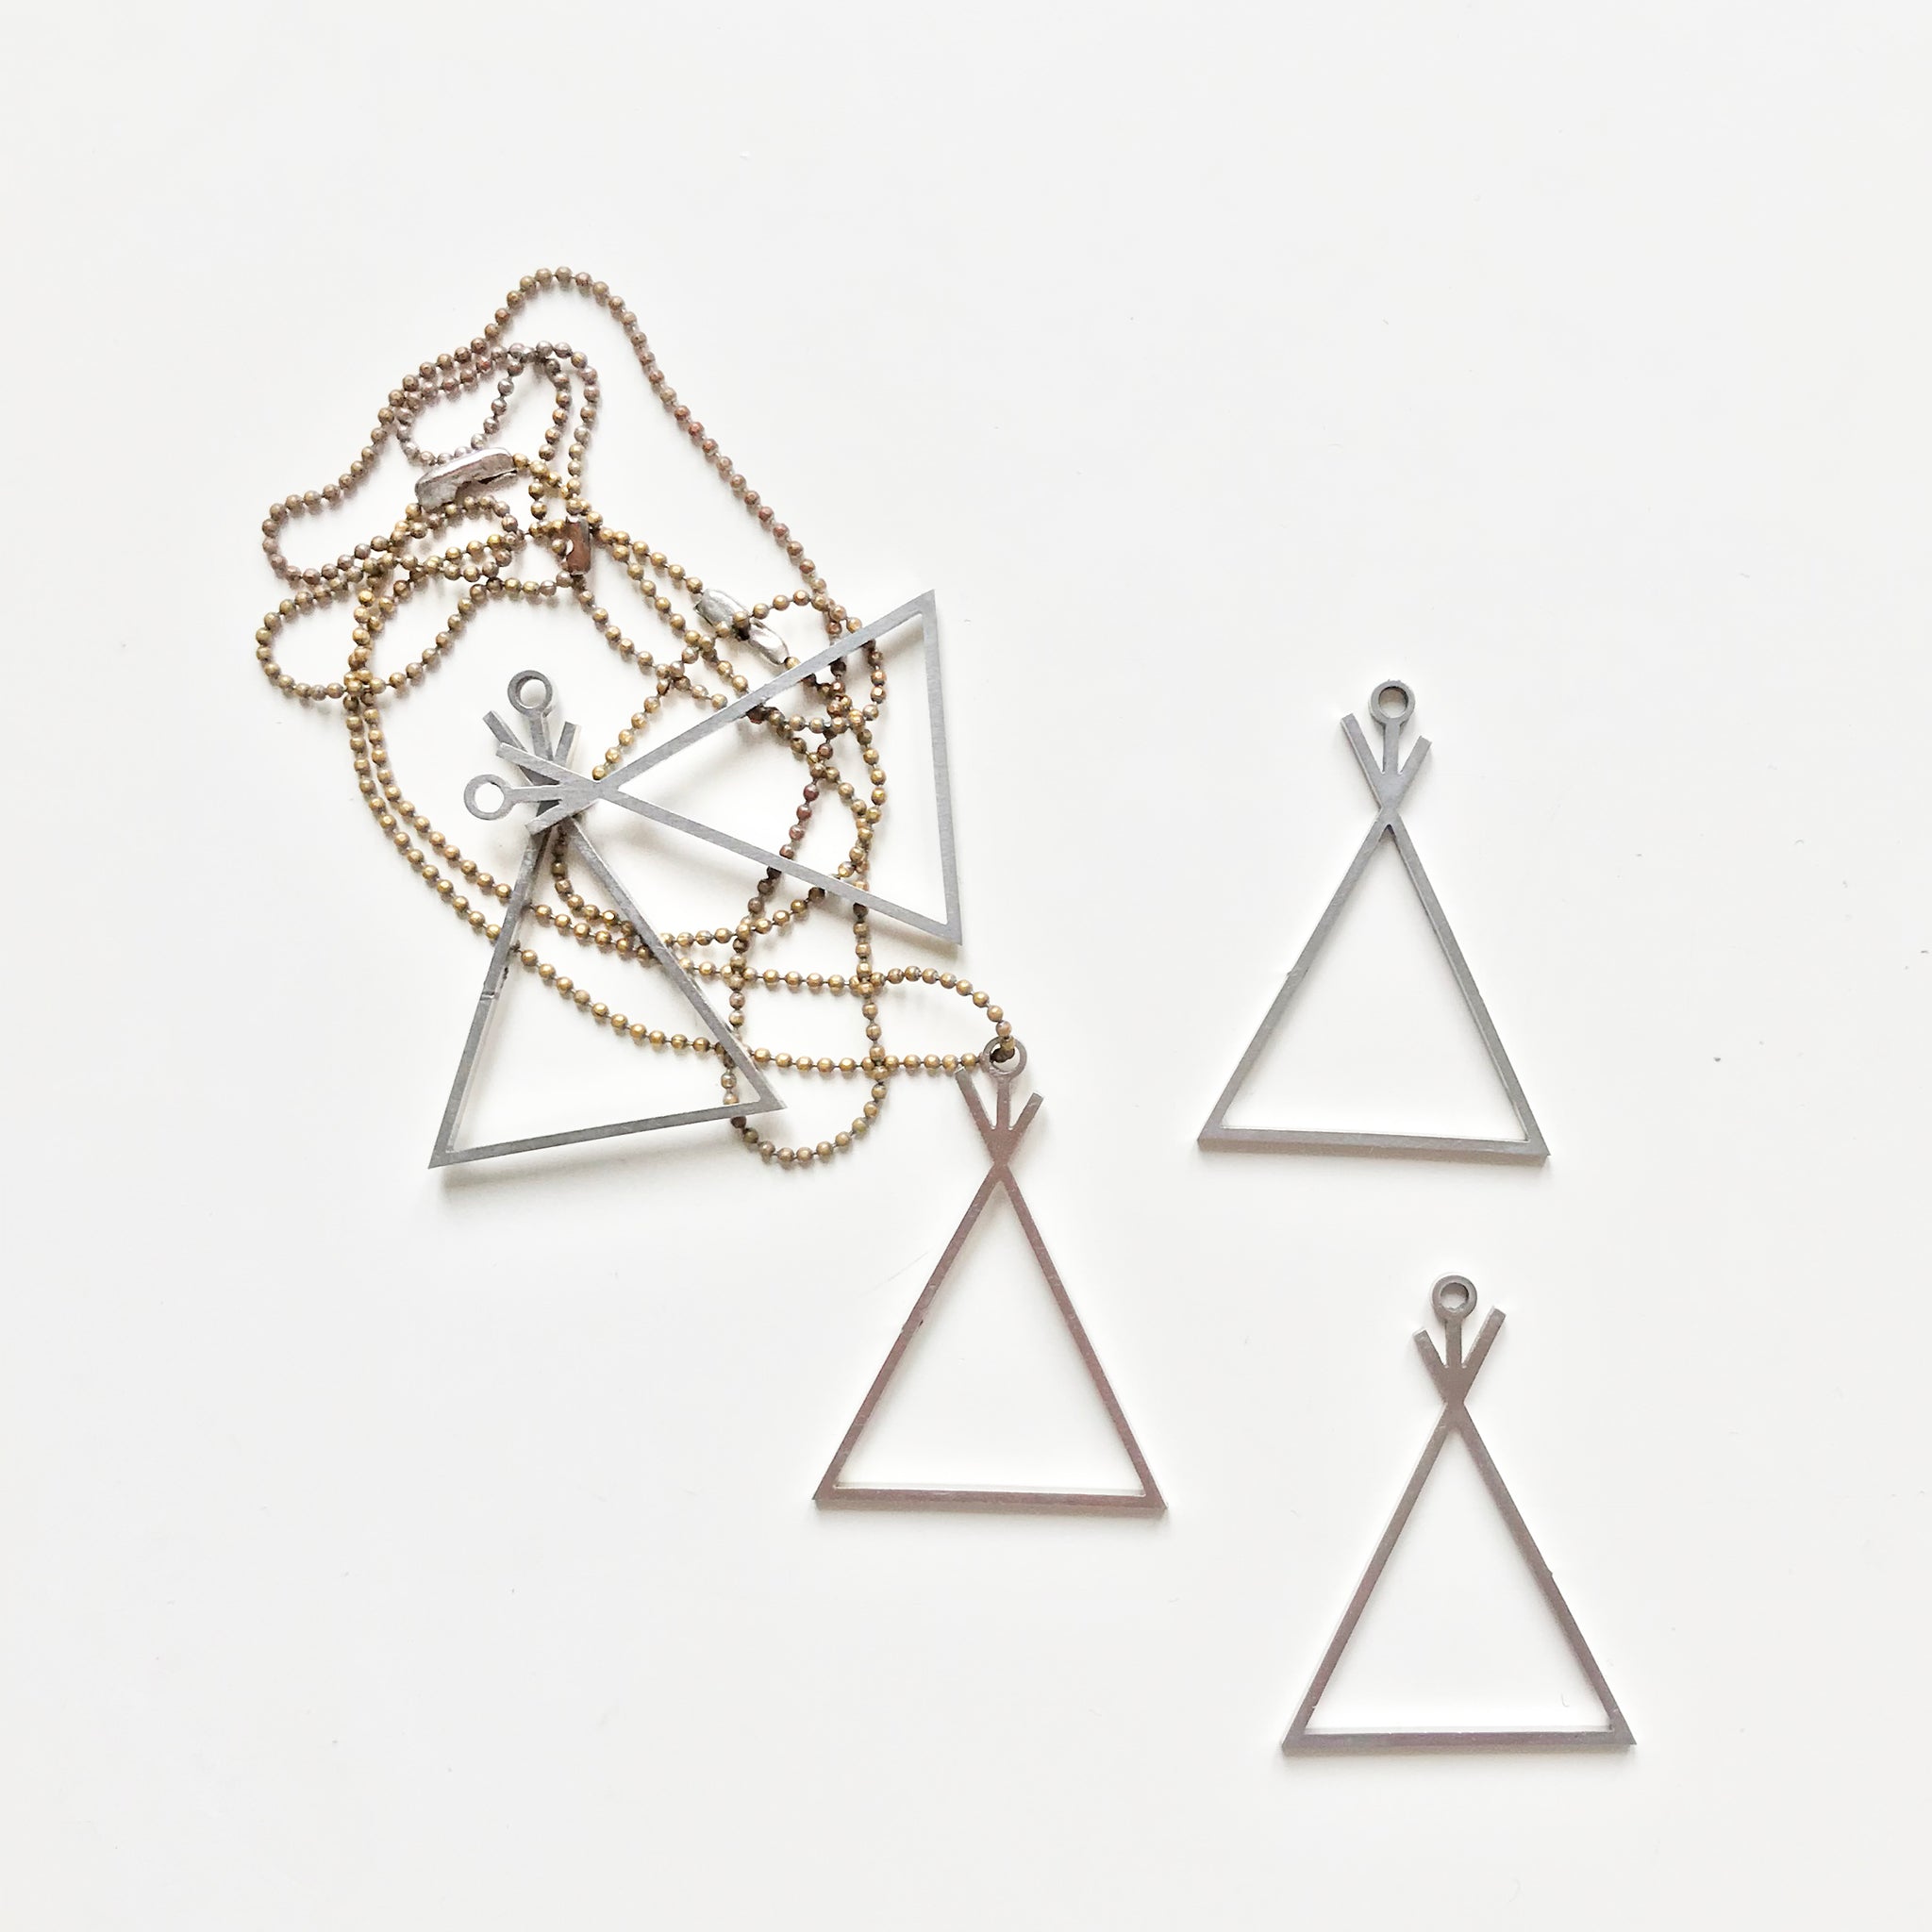 teepee - Necklace (Ornament)